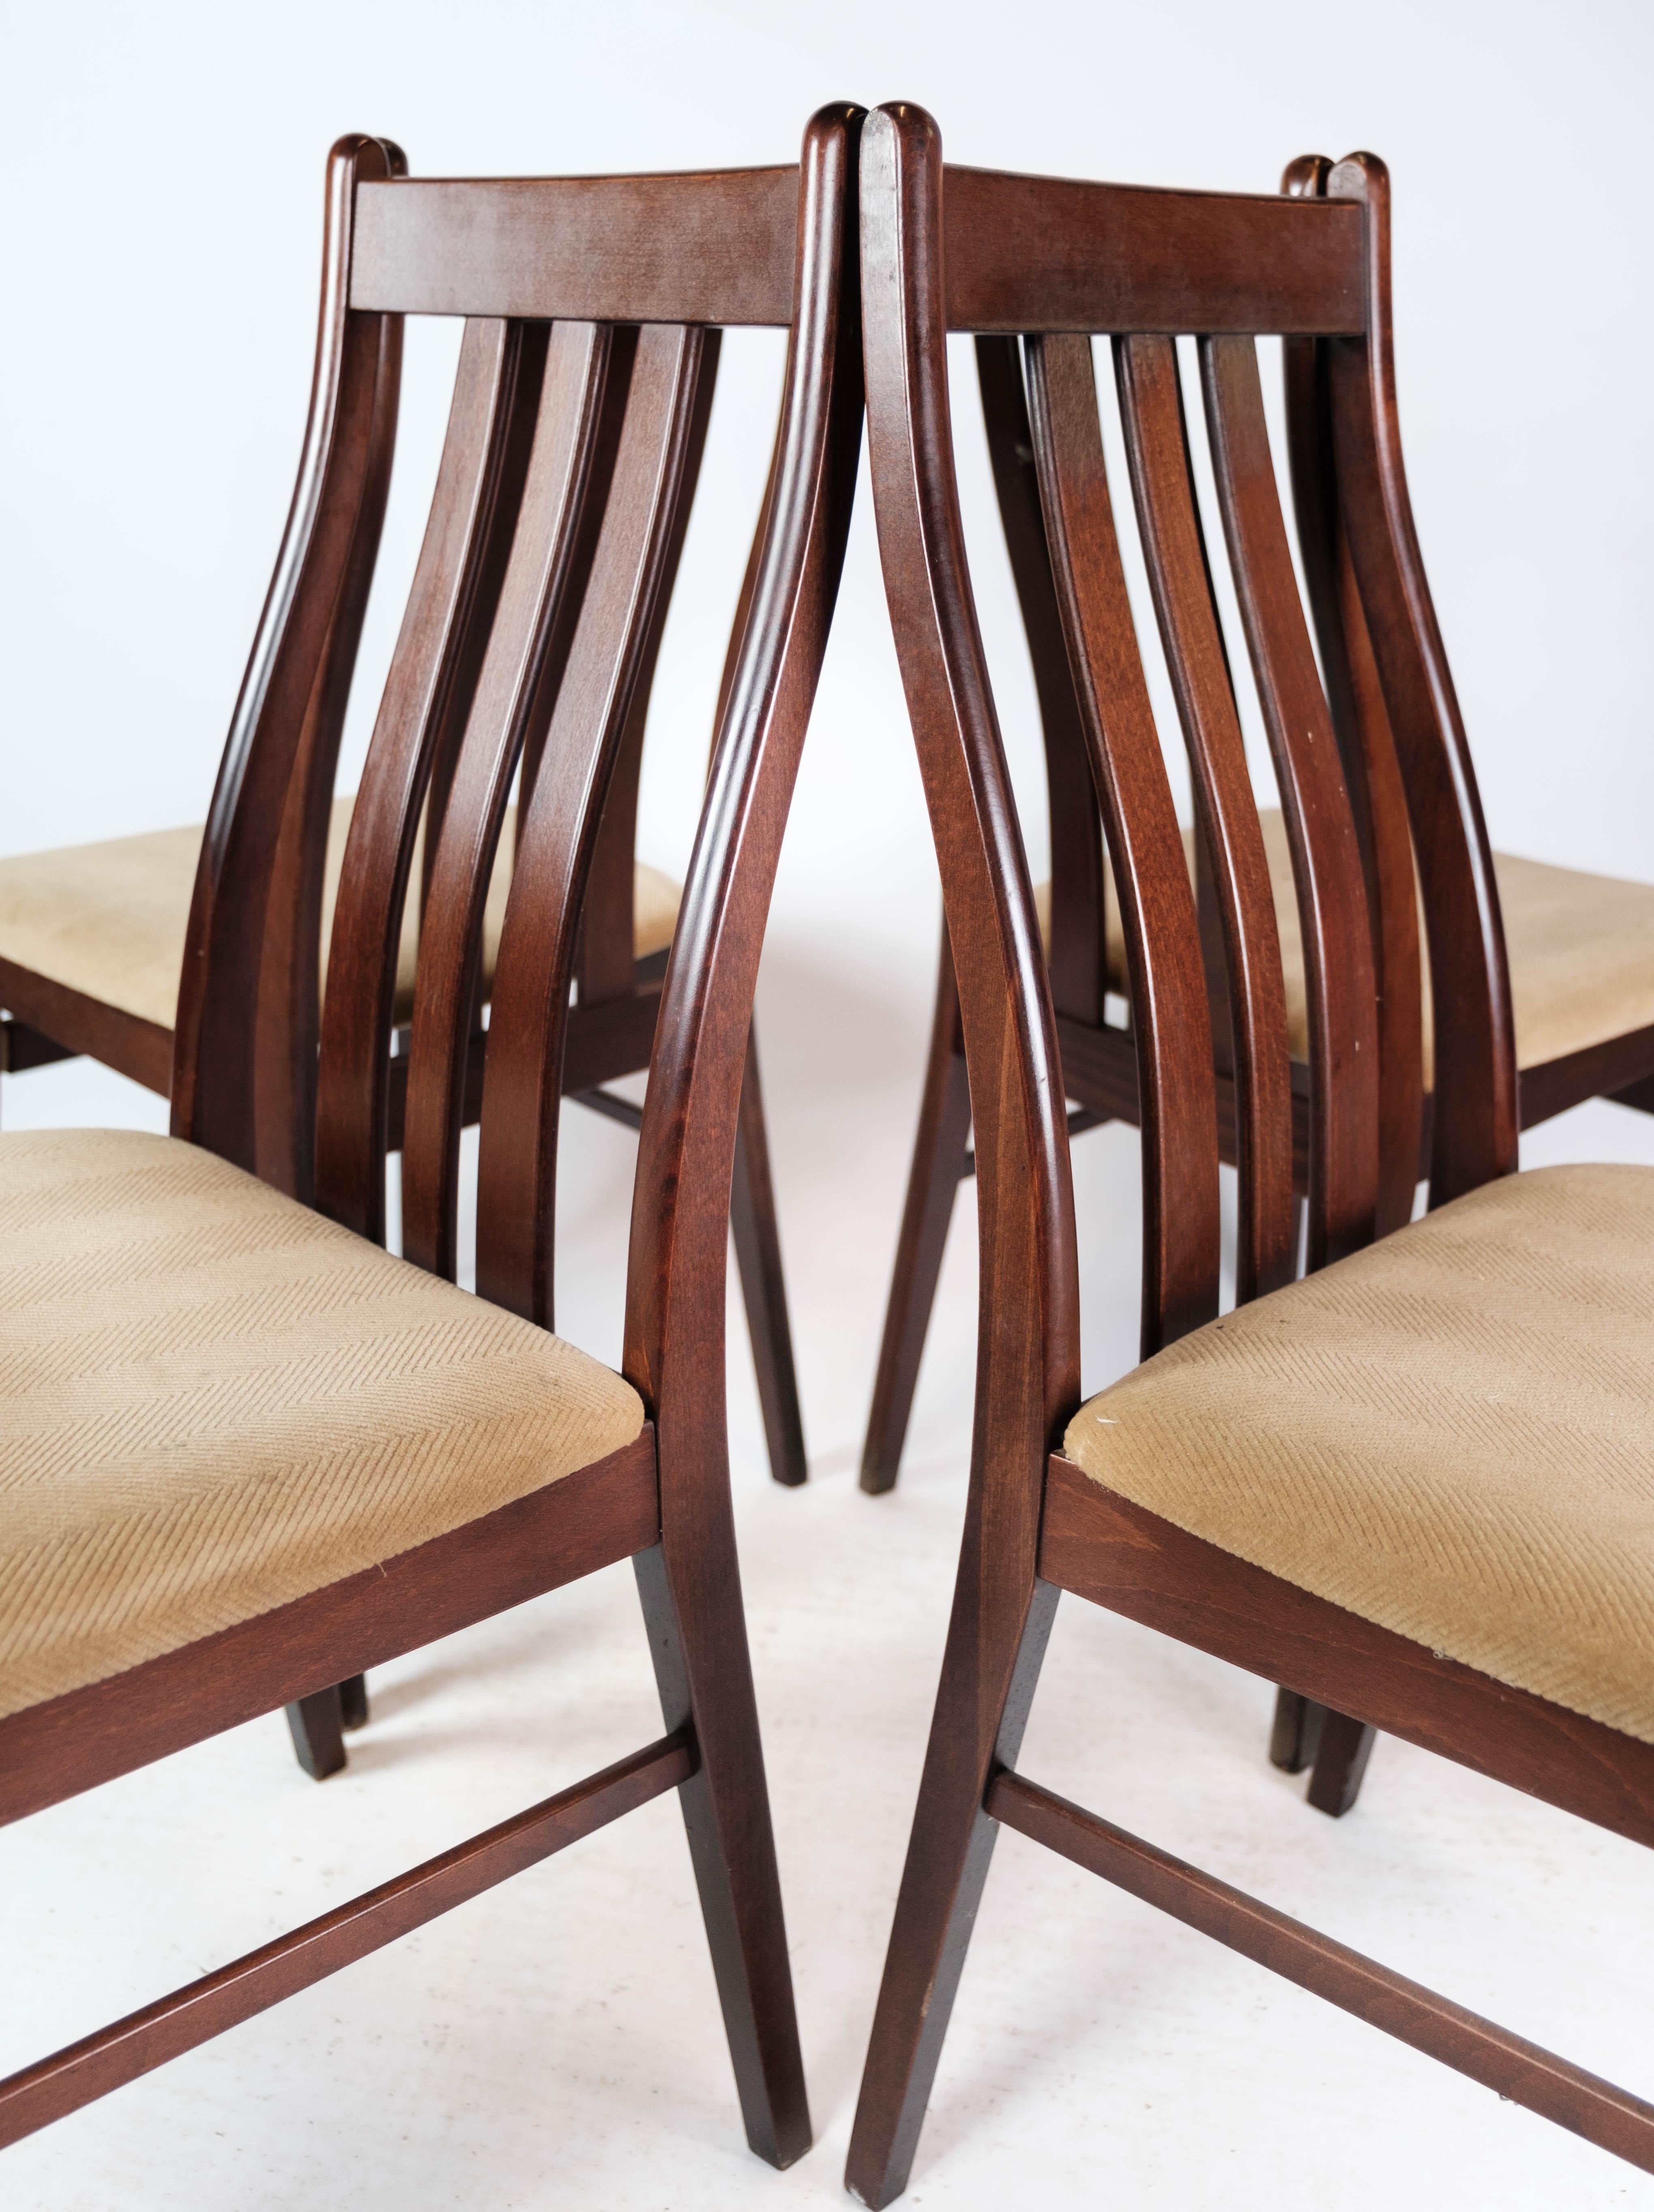 Set of Four Dining Room Chairs Made In Mahogany By Farstrup From 1960s For Sale 3